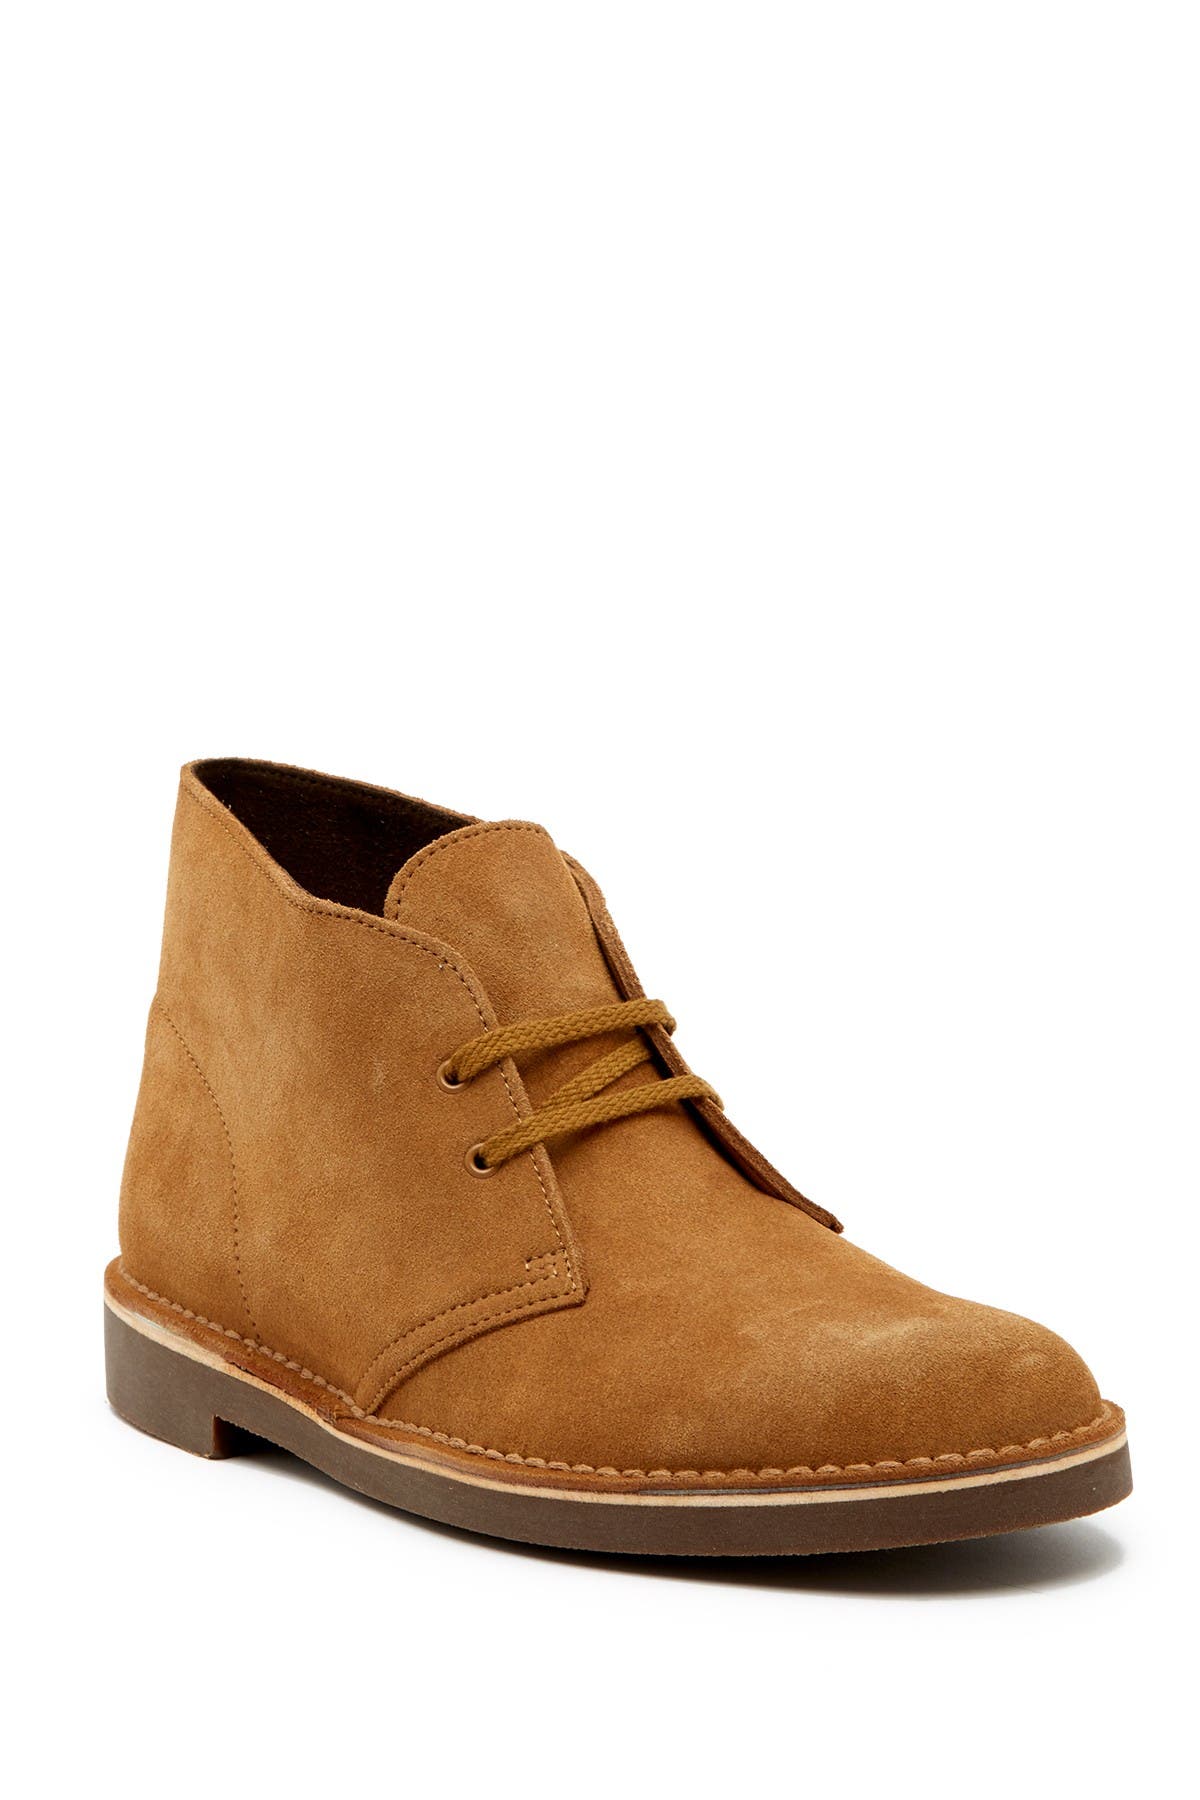 clarks wheat suede